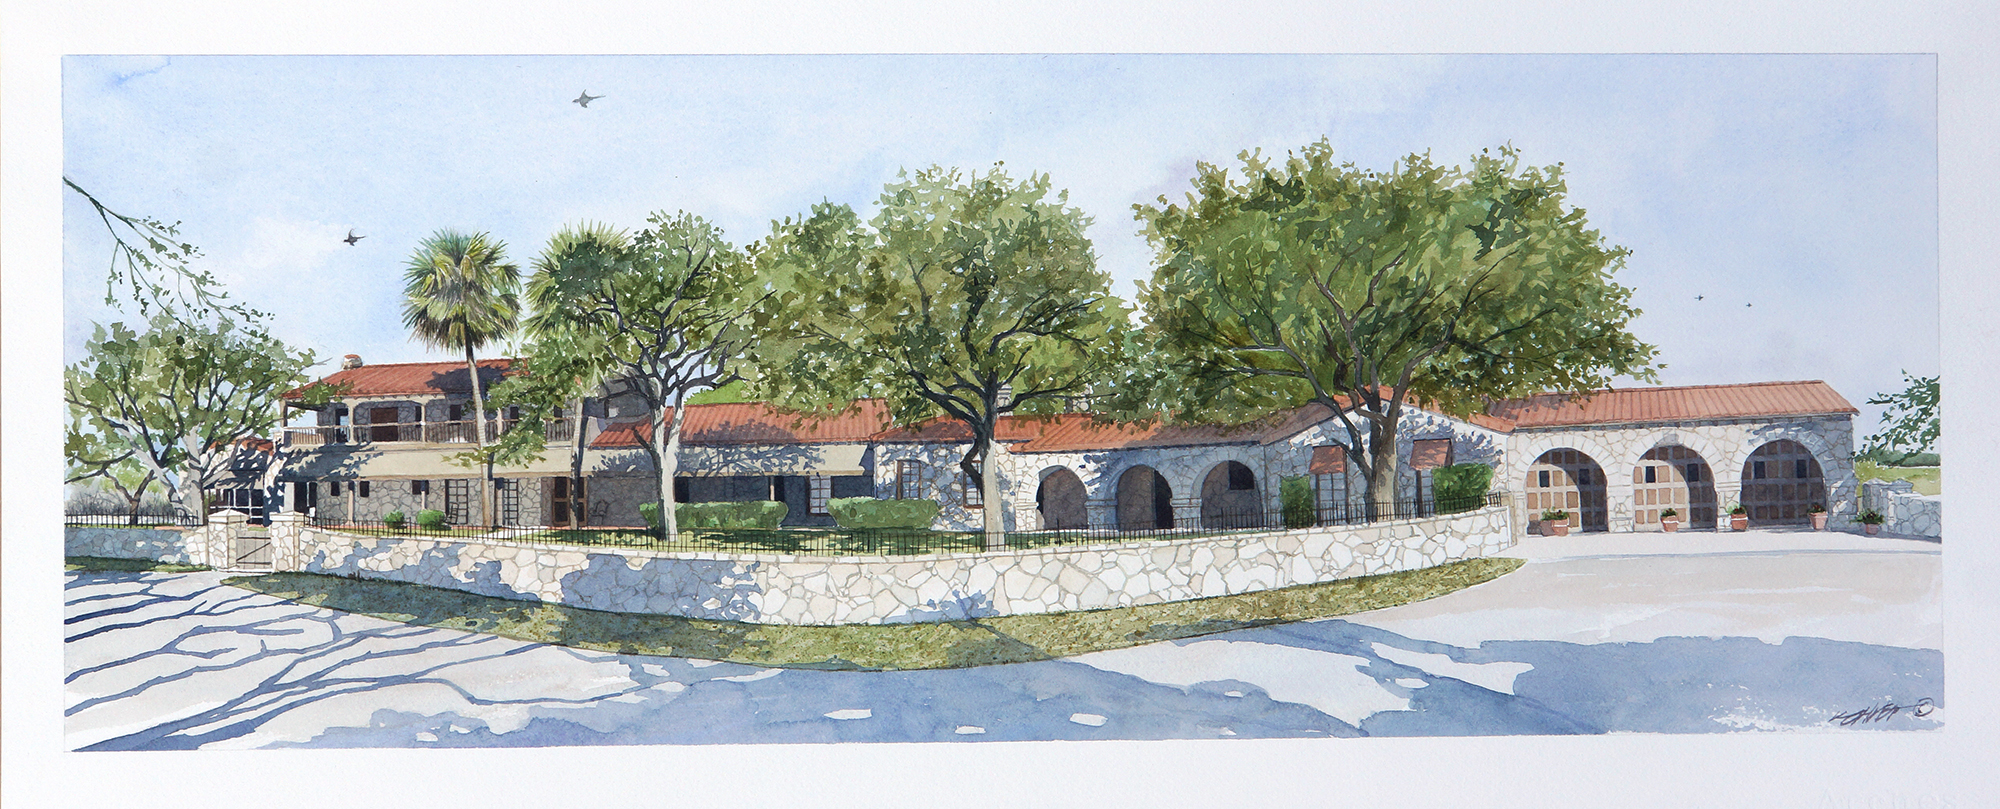 Artist rendering of the Spanish-style main house of the H.R. Smith Ranch.